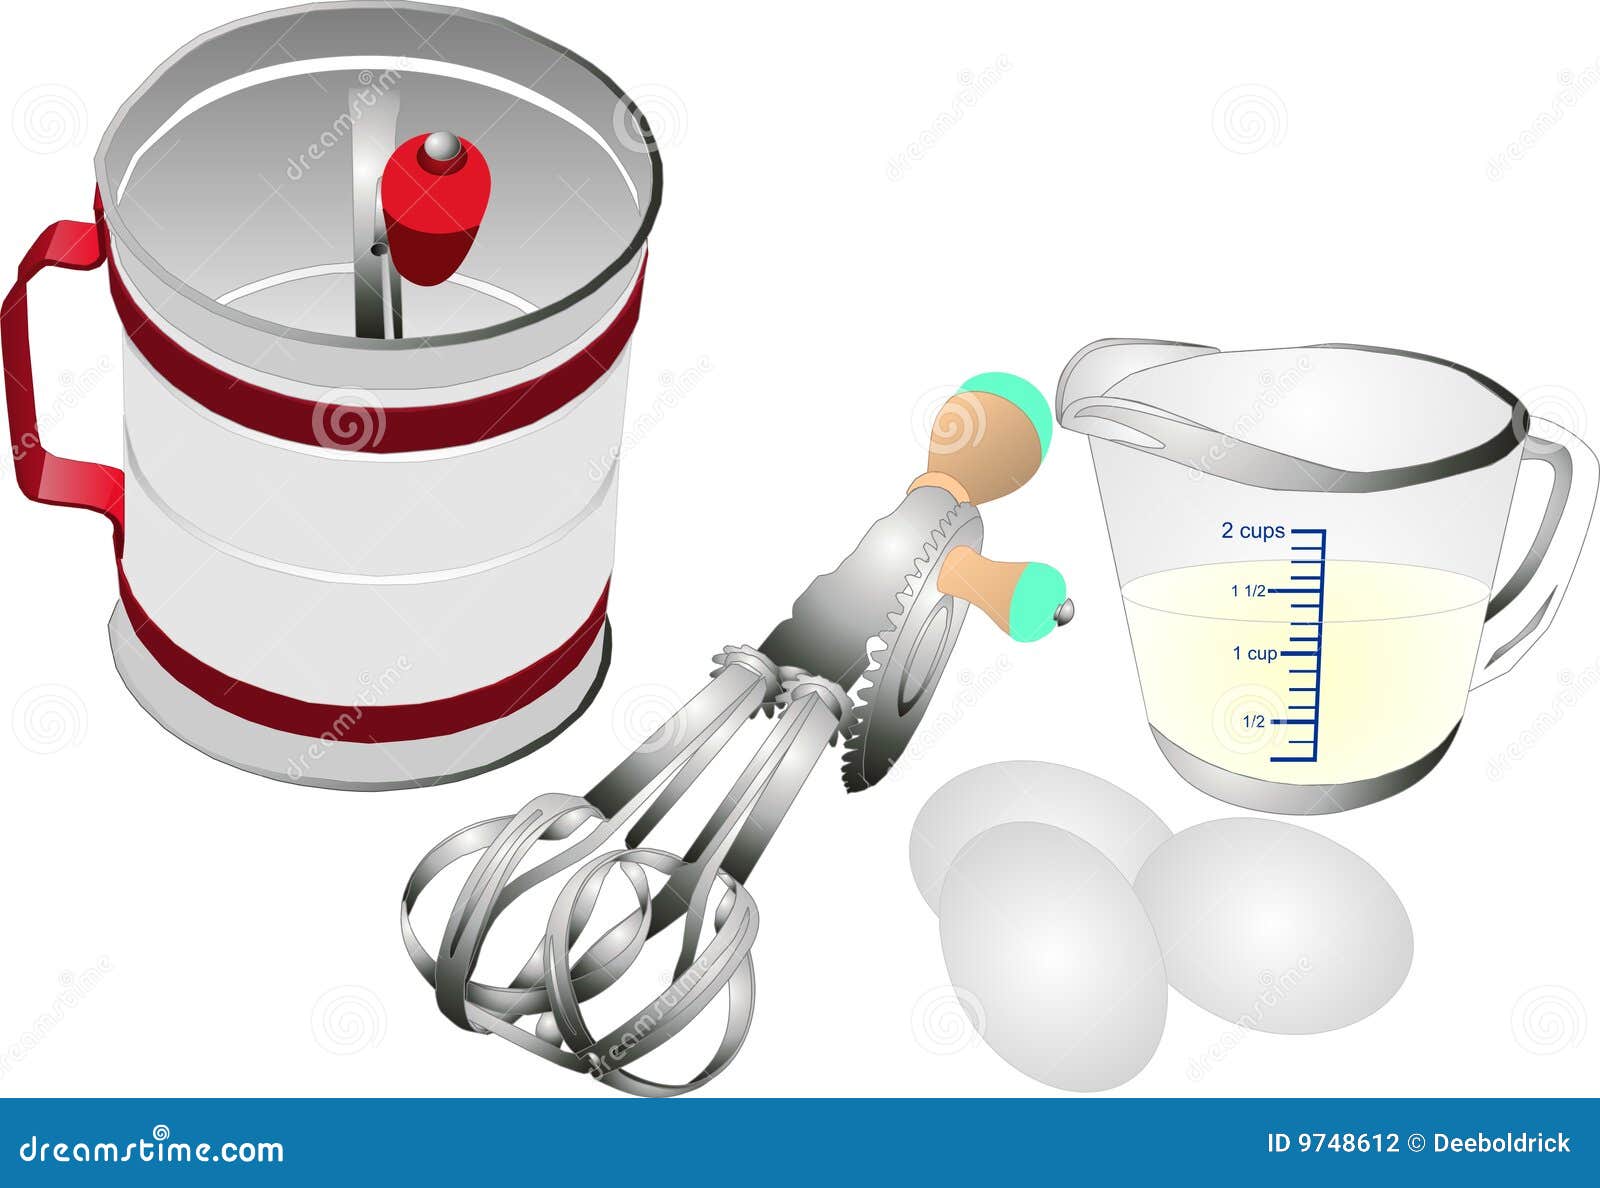 Measuring Cup For Baking And Cooking Color Vector Stock Vector Image & Art  - Alamy